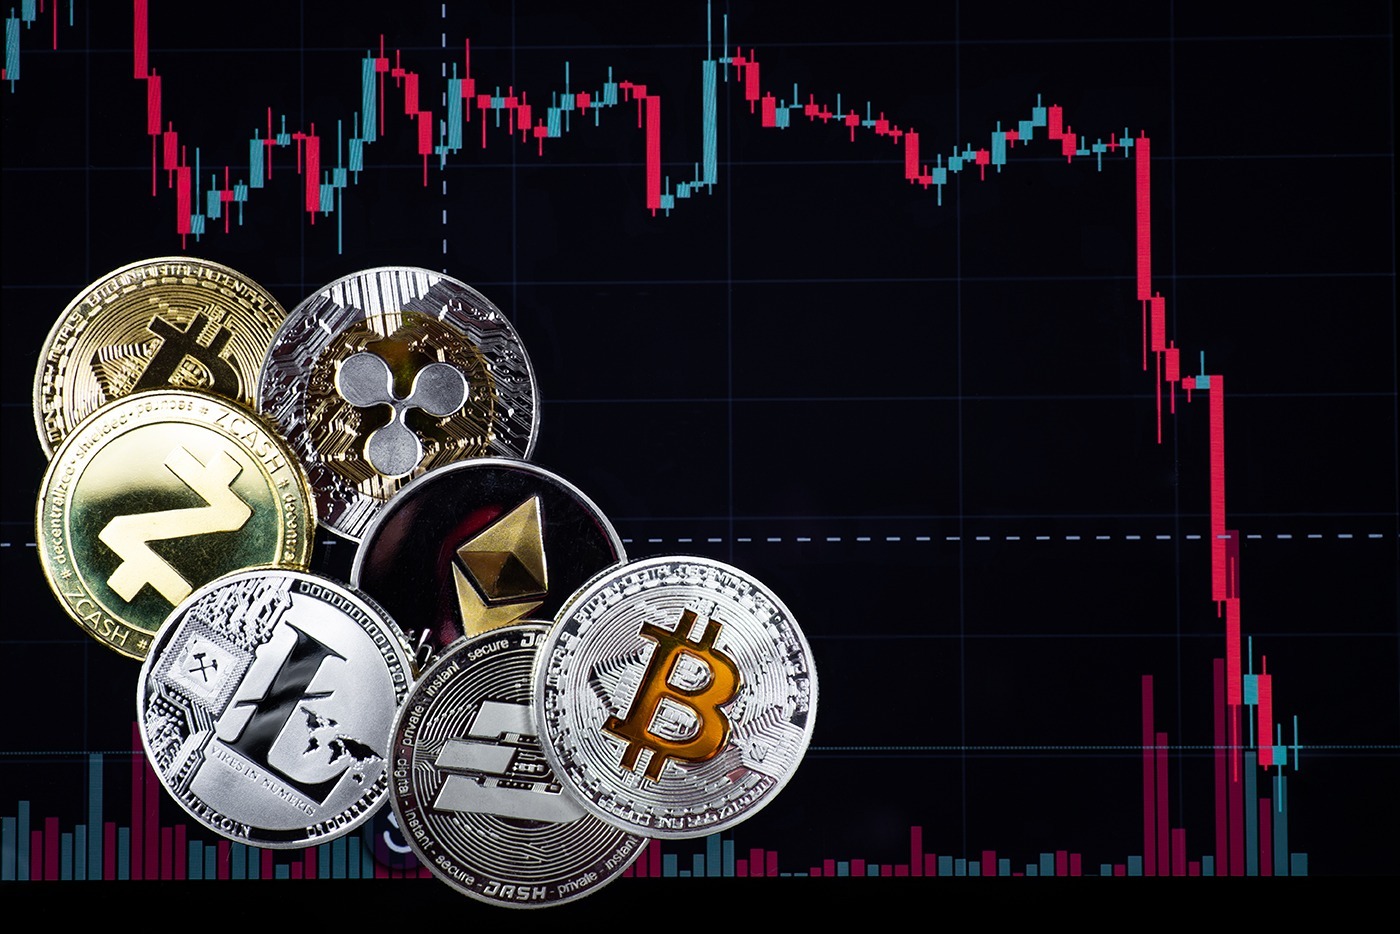 Cryptocurrencies on a chart background showing a pump and dump chart.